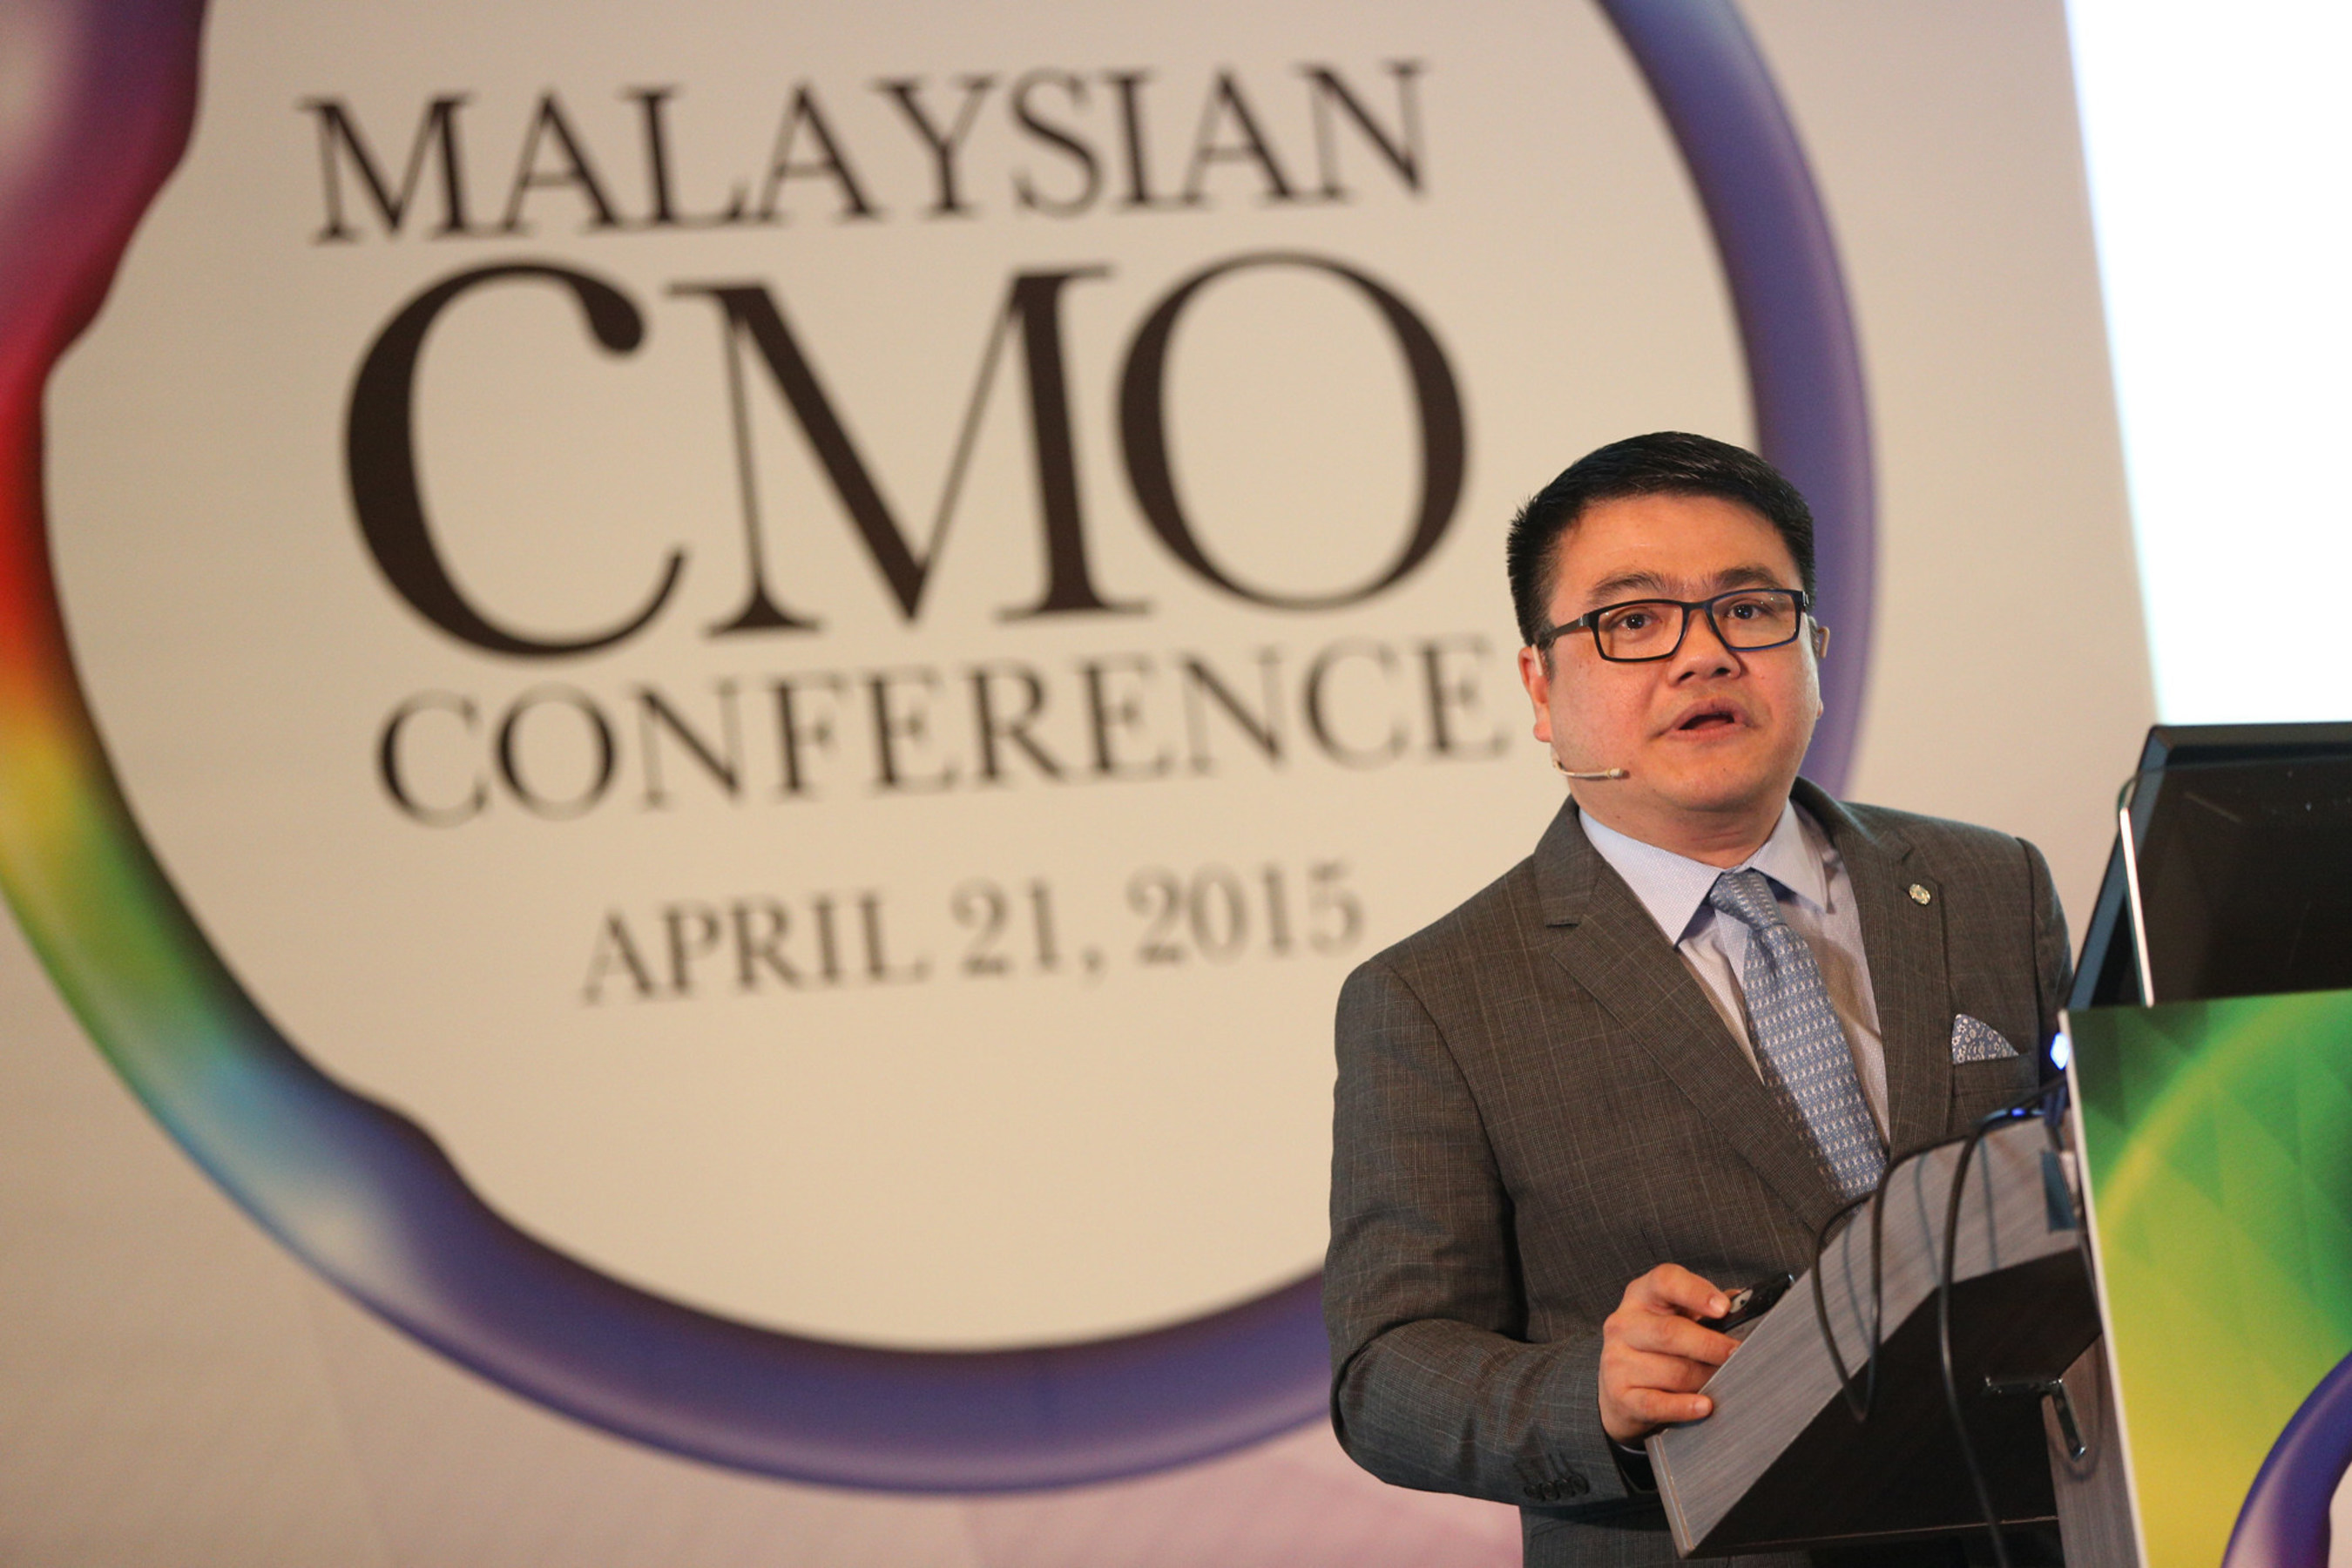 Tencent’s SY Lau Tells Malaysian CMO Conference that China has now entered the era of Digitalization 3.0